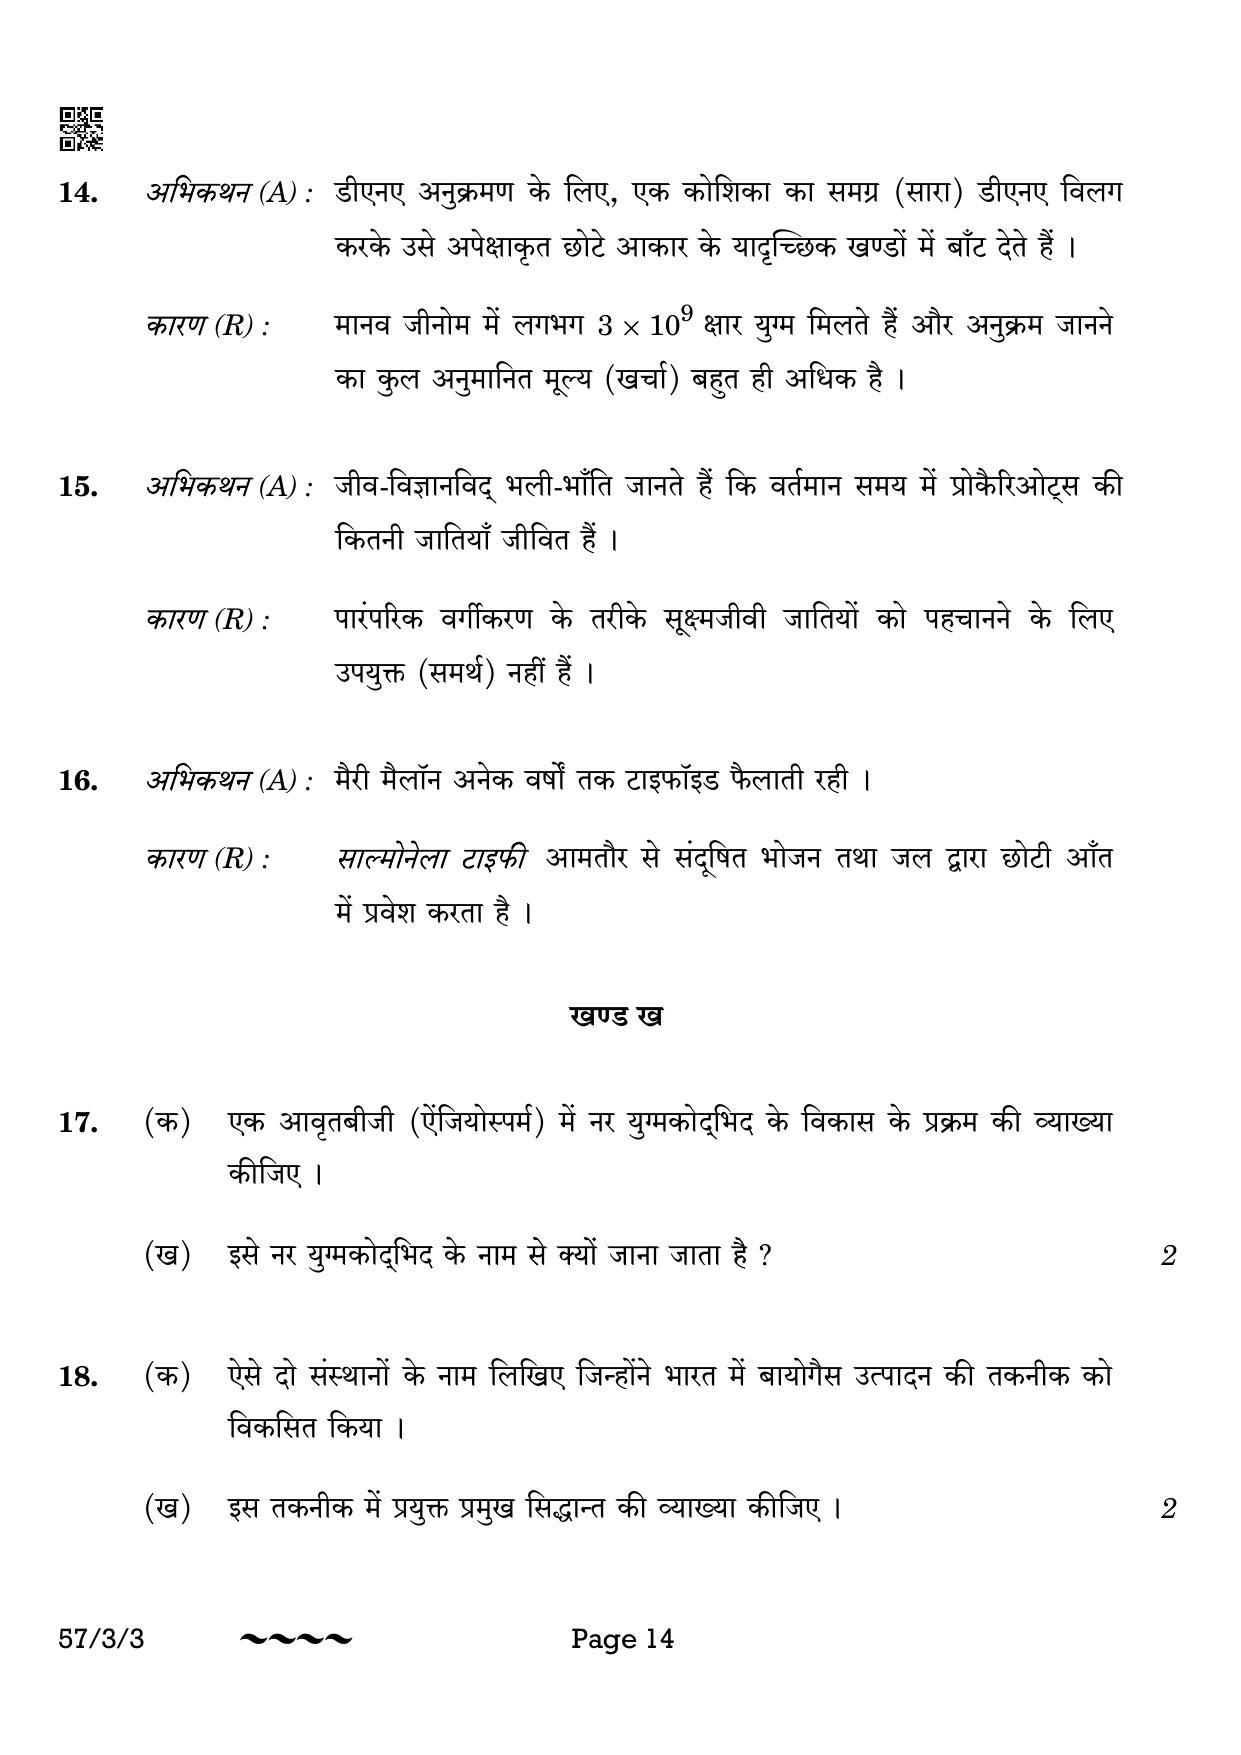 CBSE Class 12 57-3-3 Biology 2023 Question Paper - Page 14